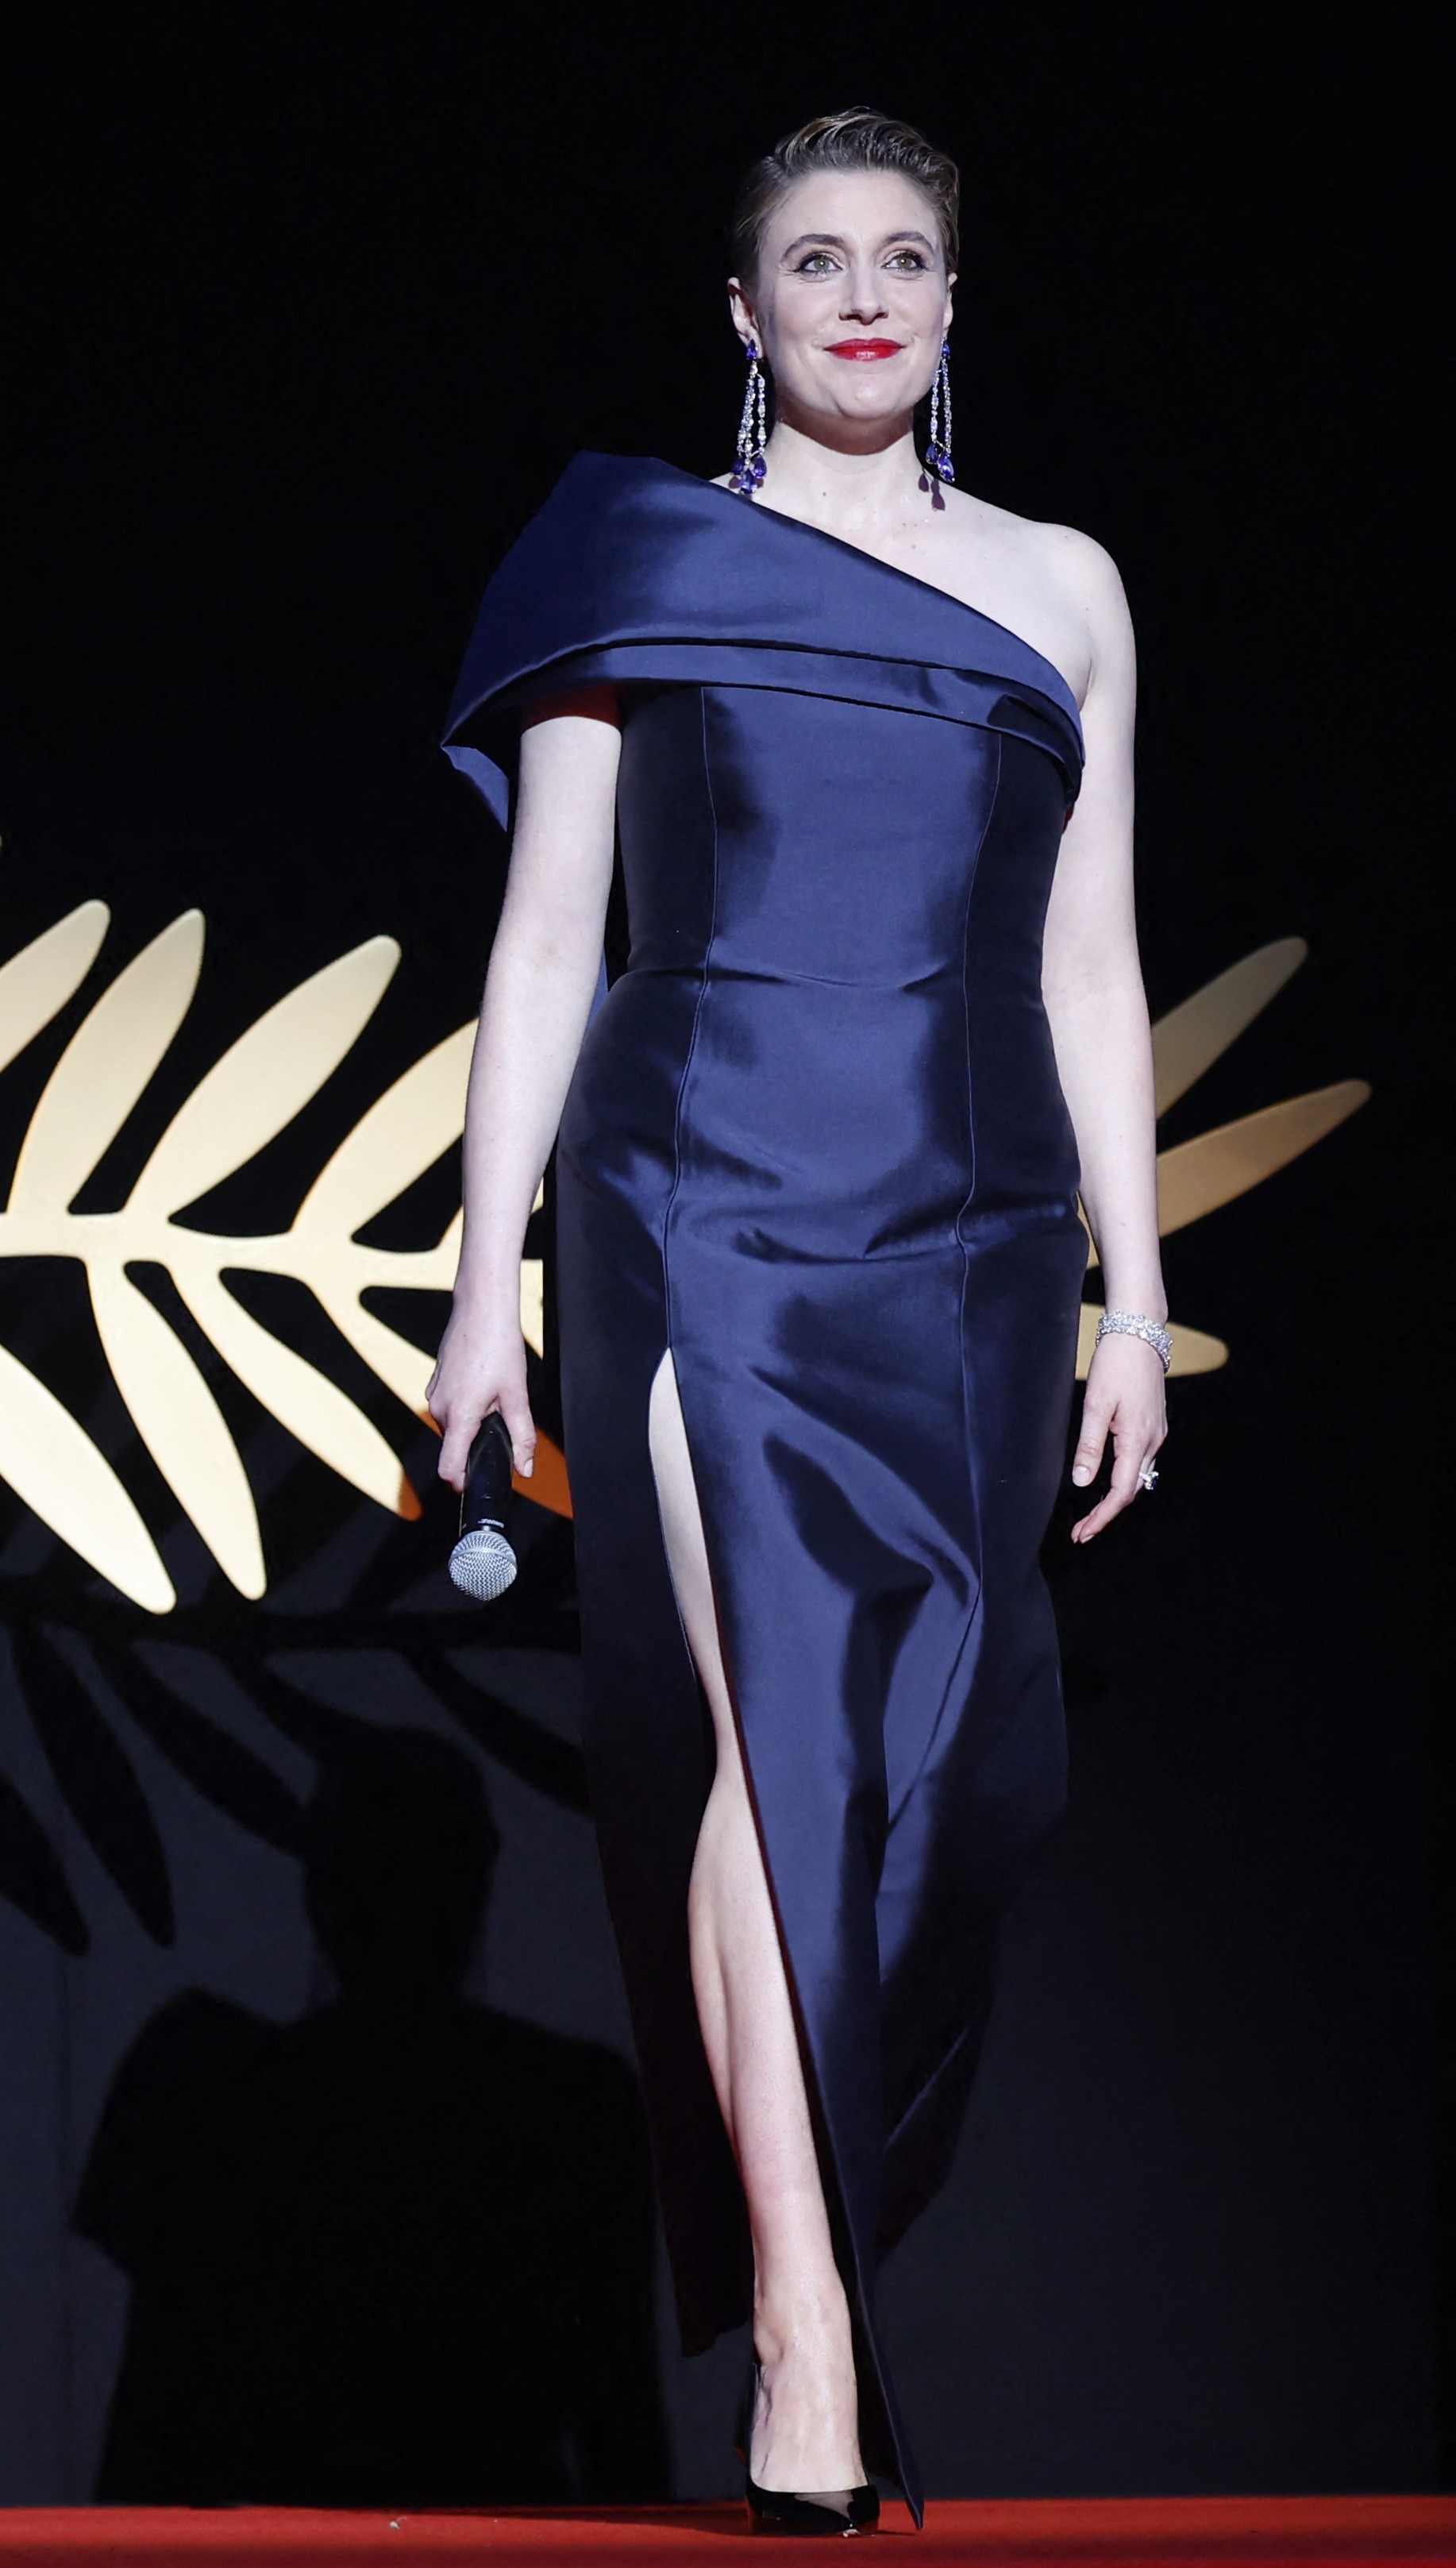 Greta Gerwig wearing a dark navy blue off-the-shoulder dress with an oversized sleeve and a high slit